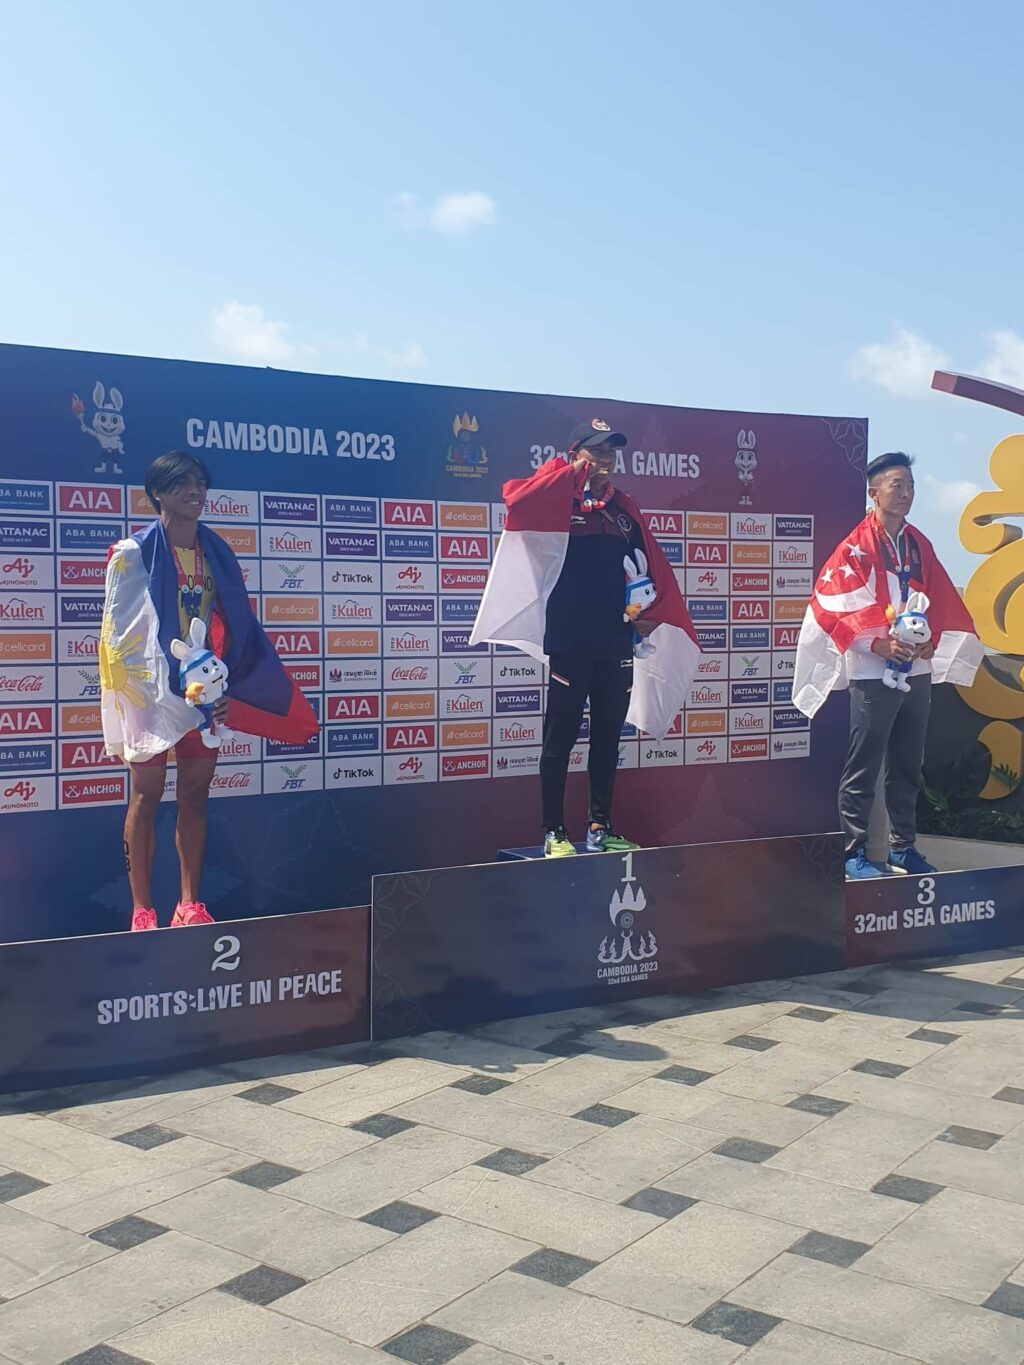 Remolino bags silver medal in SEAG aquathlon. In photo is Andrew Kim Remolino (left) during the awarding of the SEA Games aquathlon event. | Photo from Roland Remolino